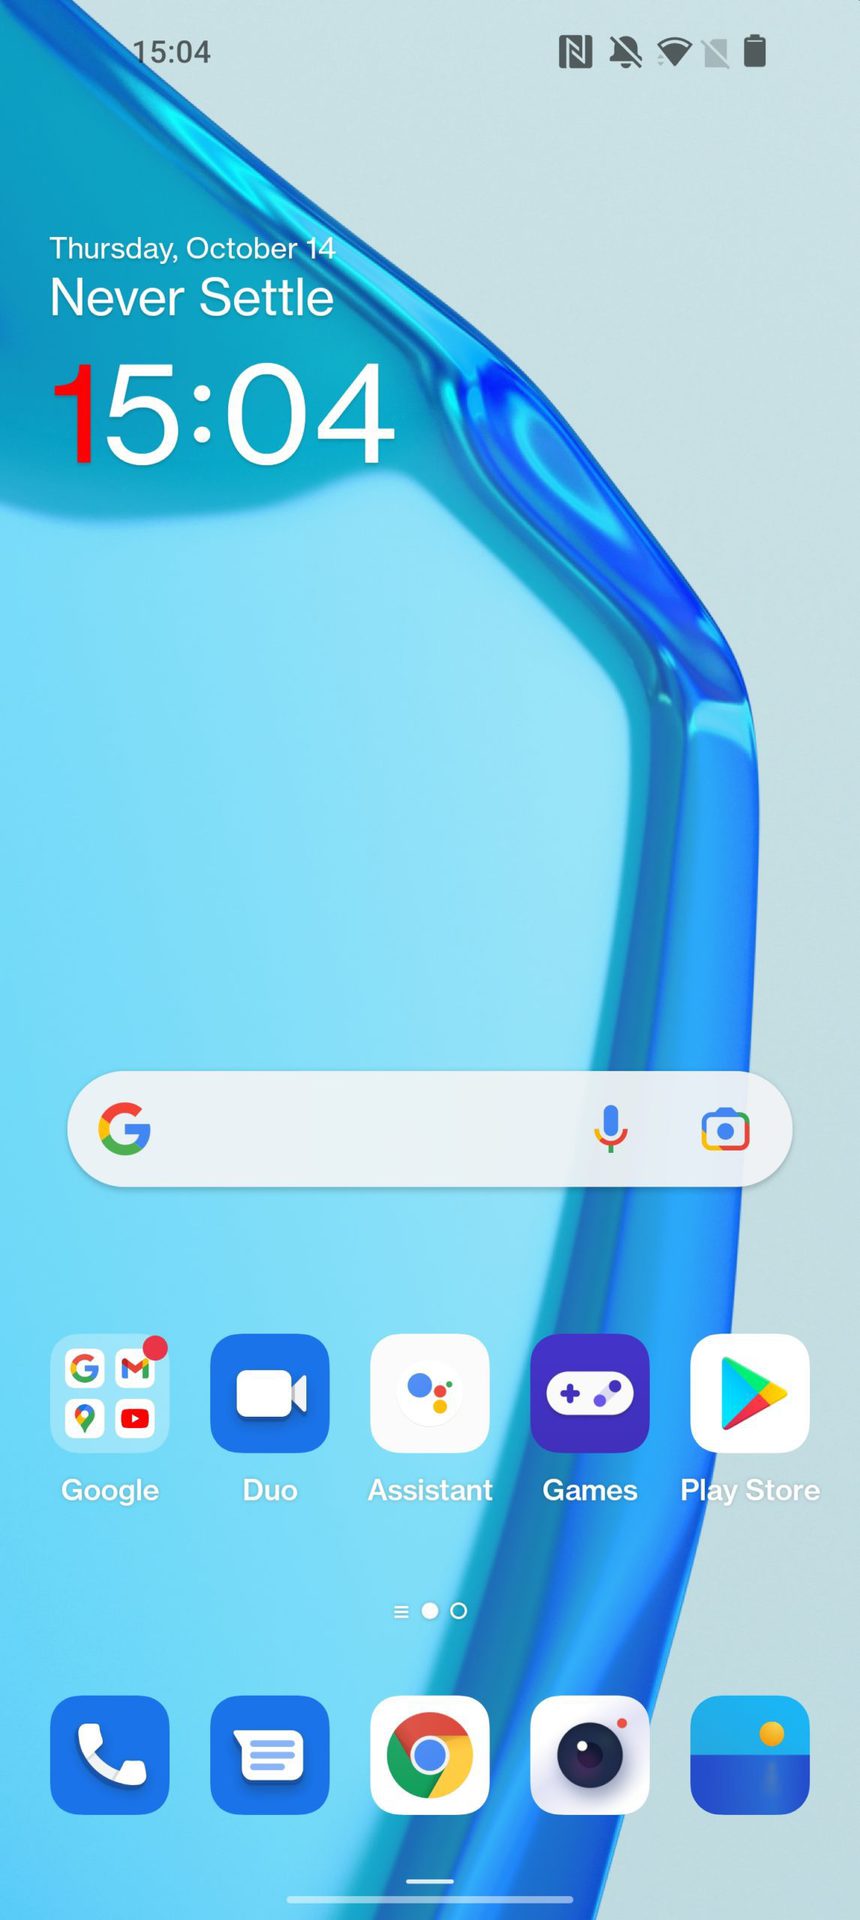 Oxygen OS 12 Beta Screenshot 3 showing app icons and search bar